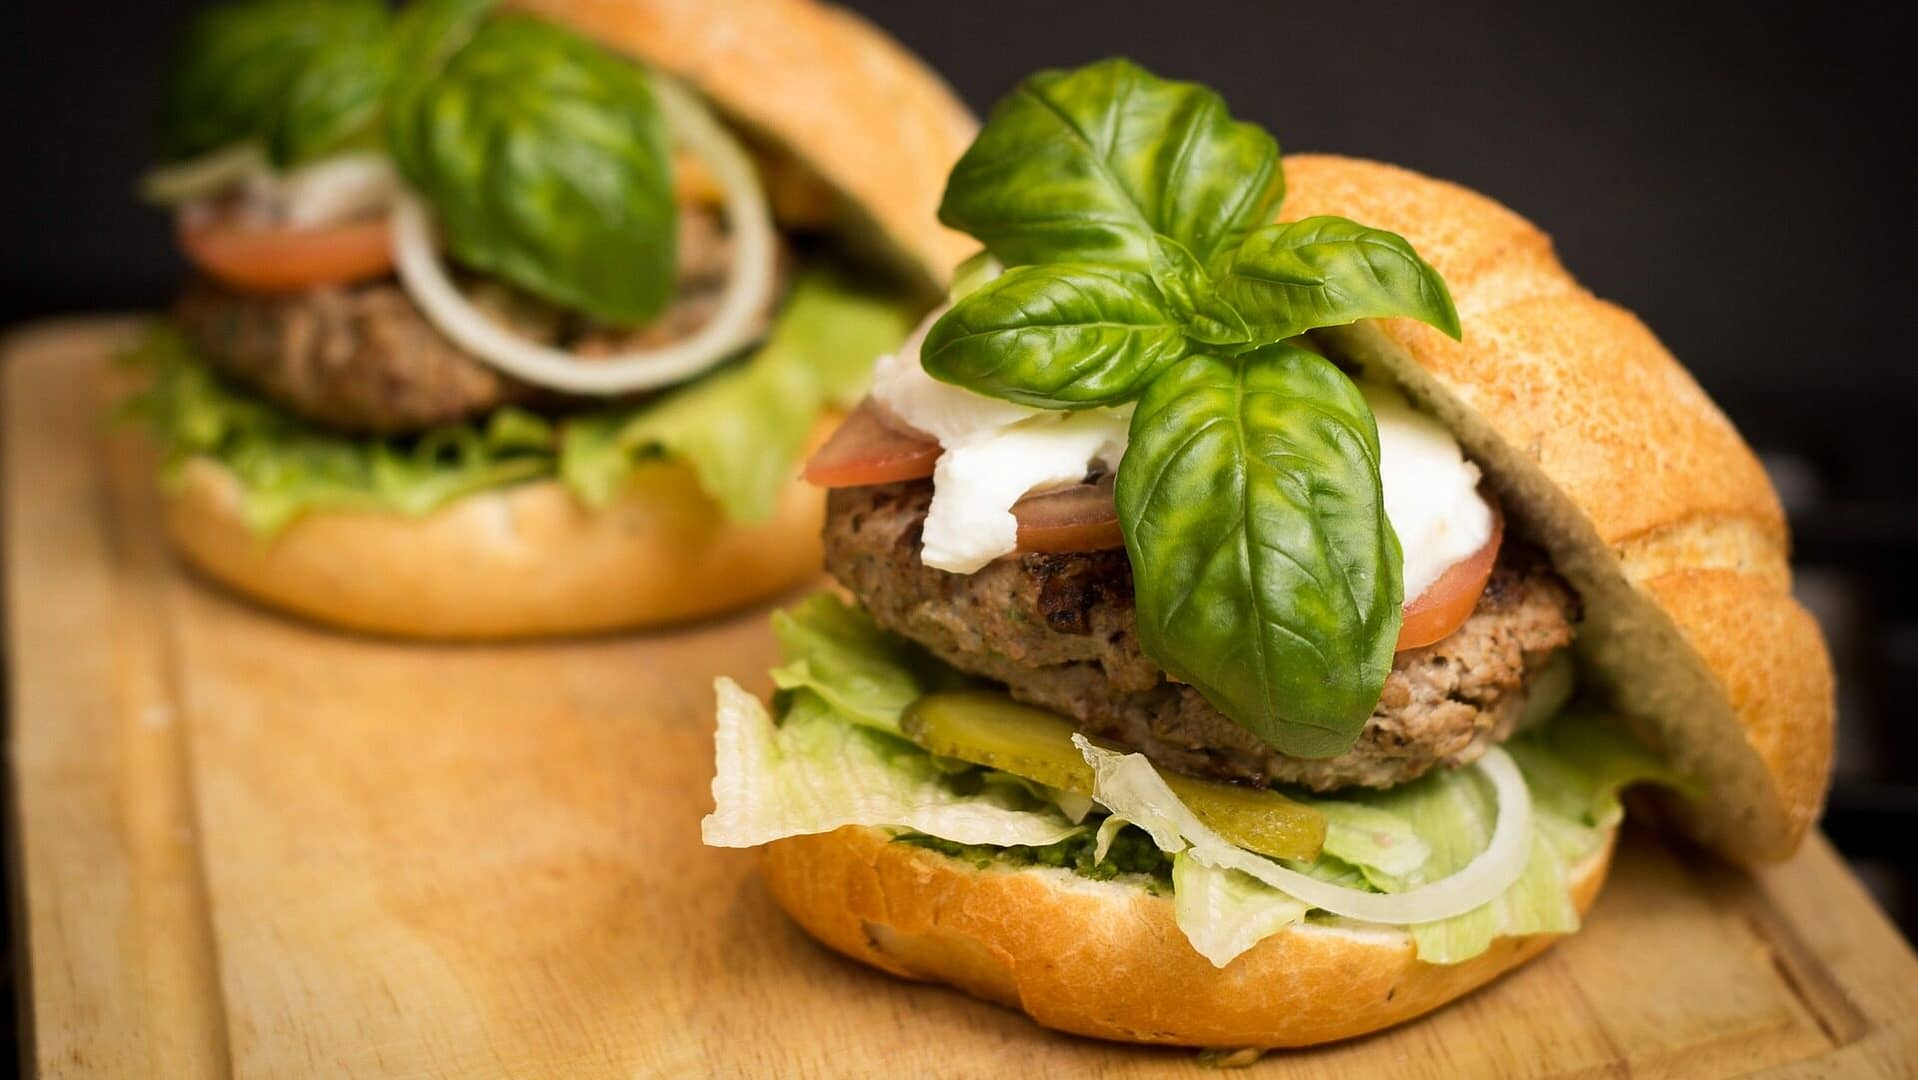 Image: A Hamburger with a huge basil sprig on it.